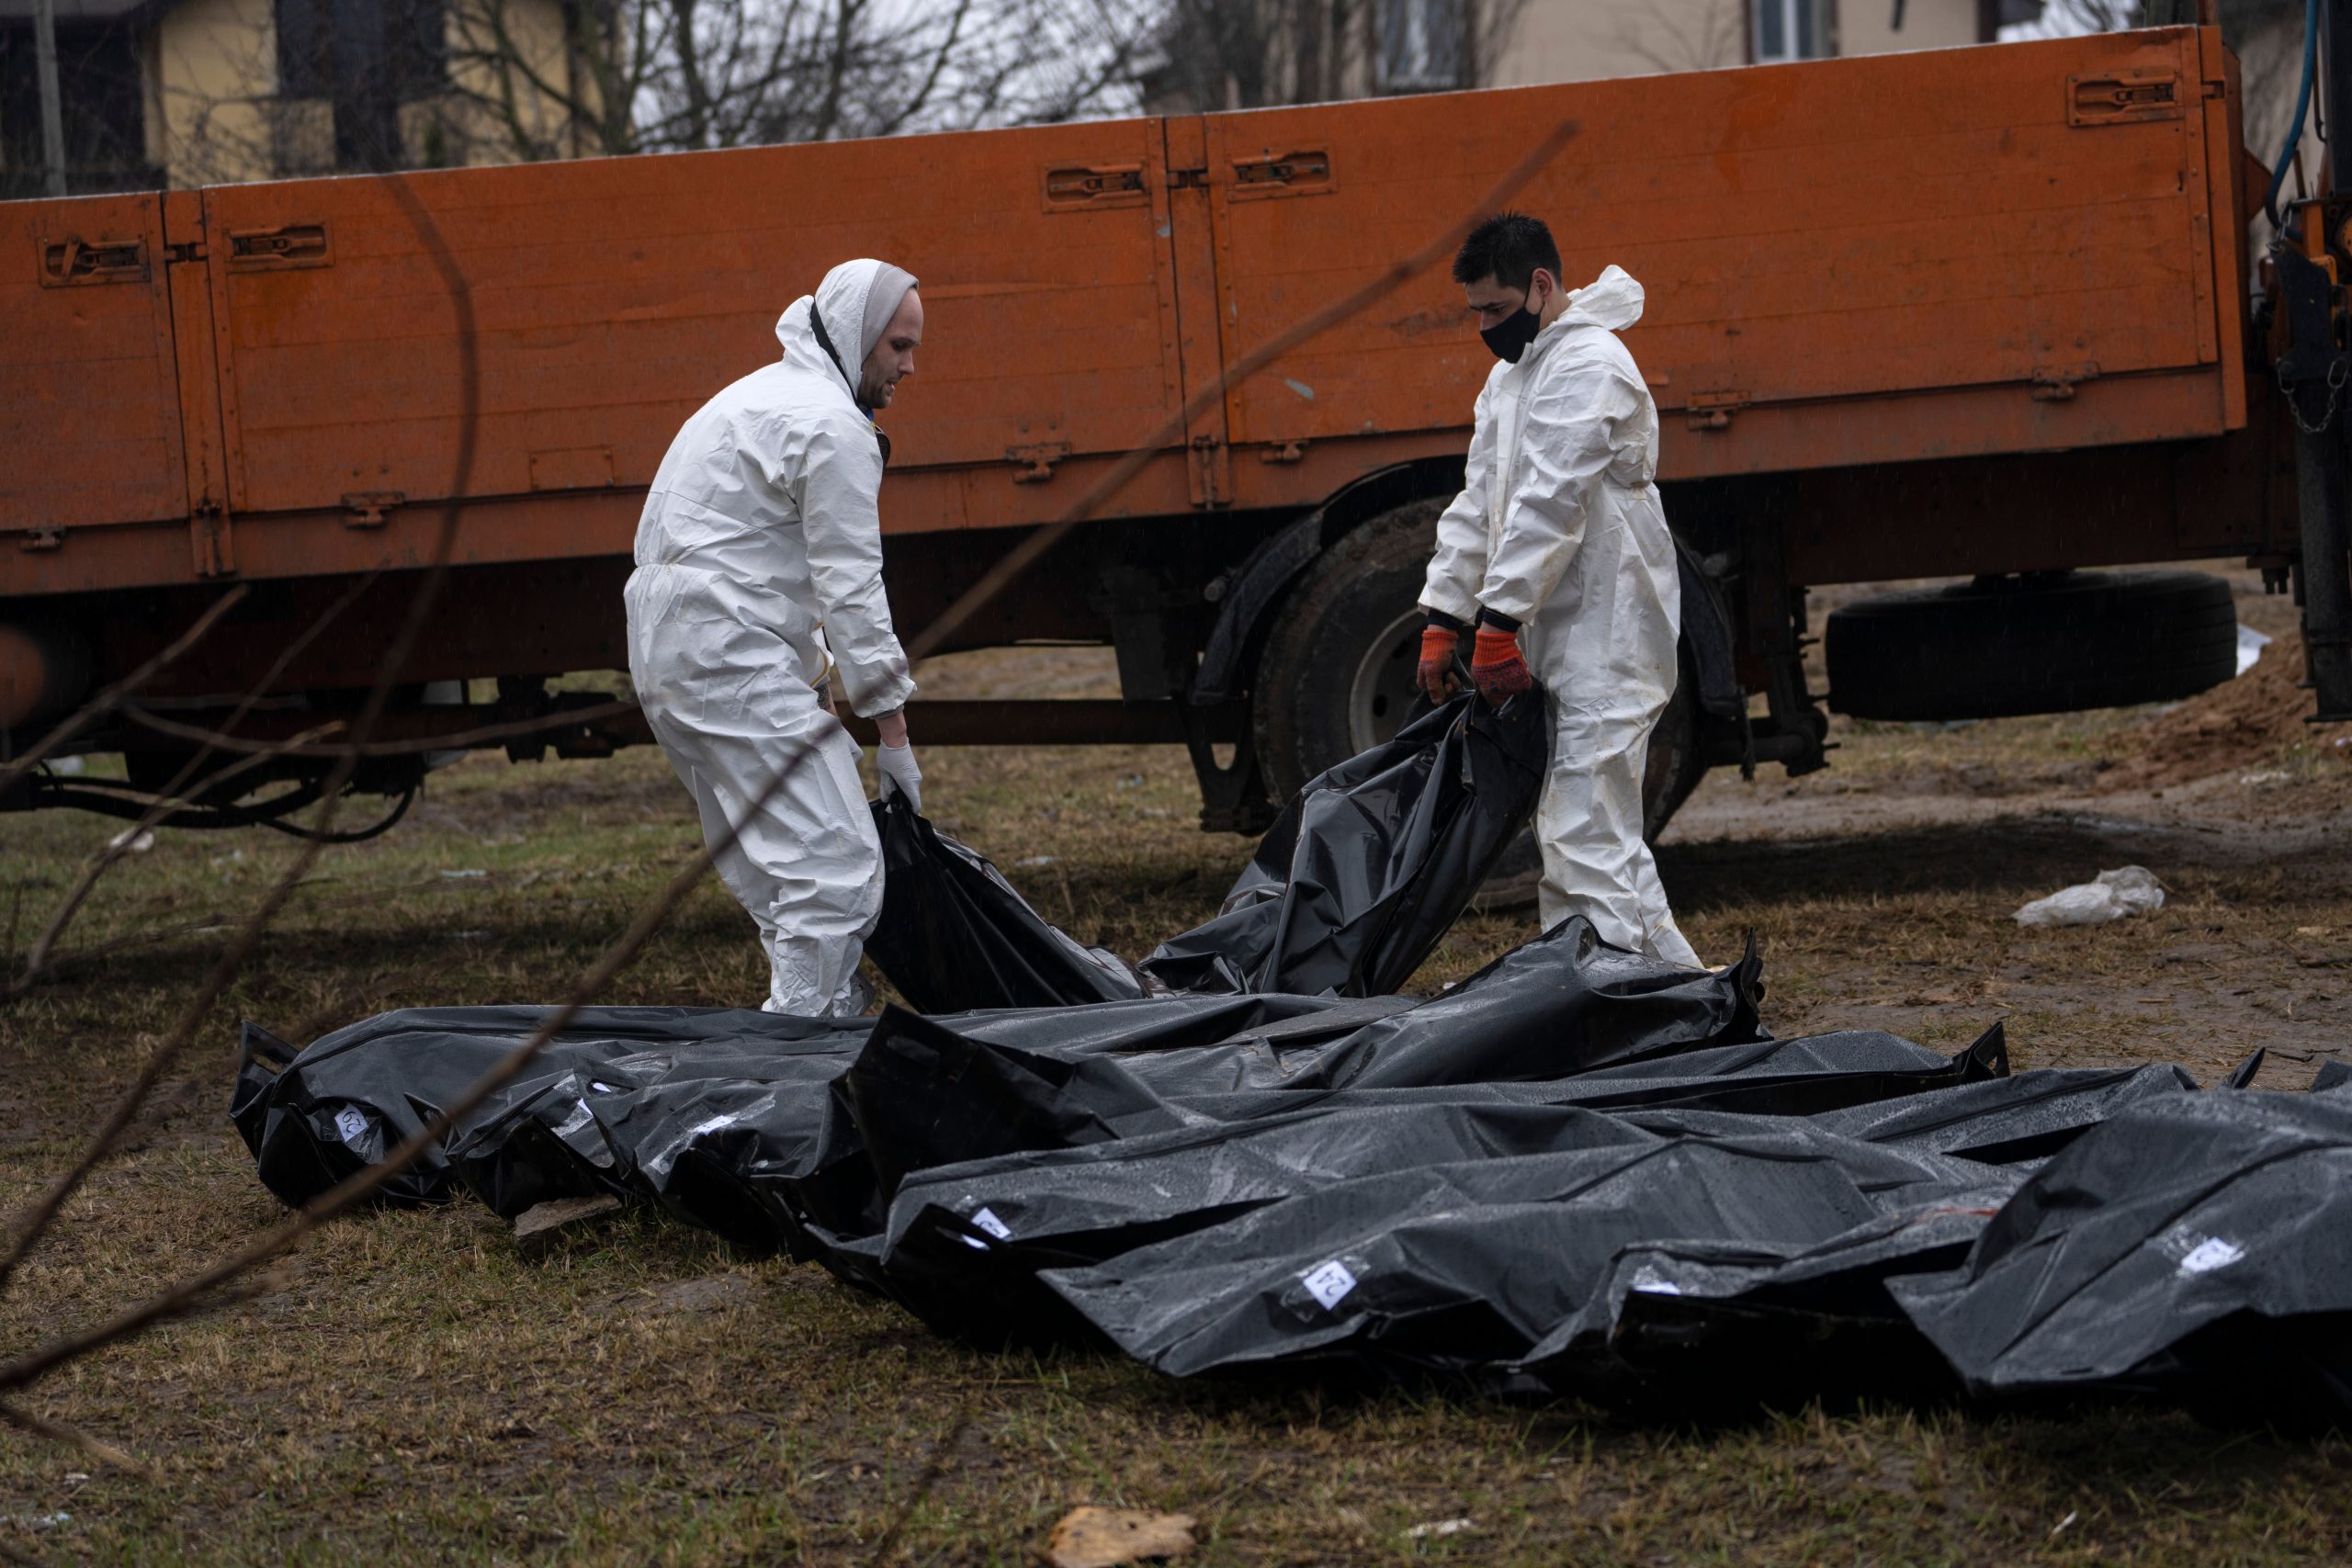 More than 1,200 bodies found in Kyiv as Russia moves East in Ukraine